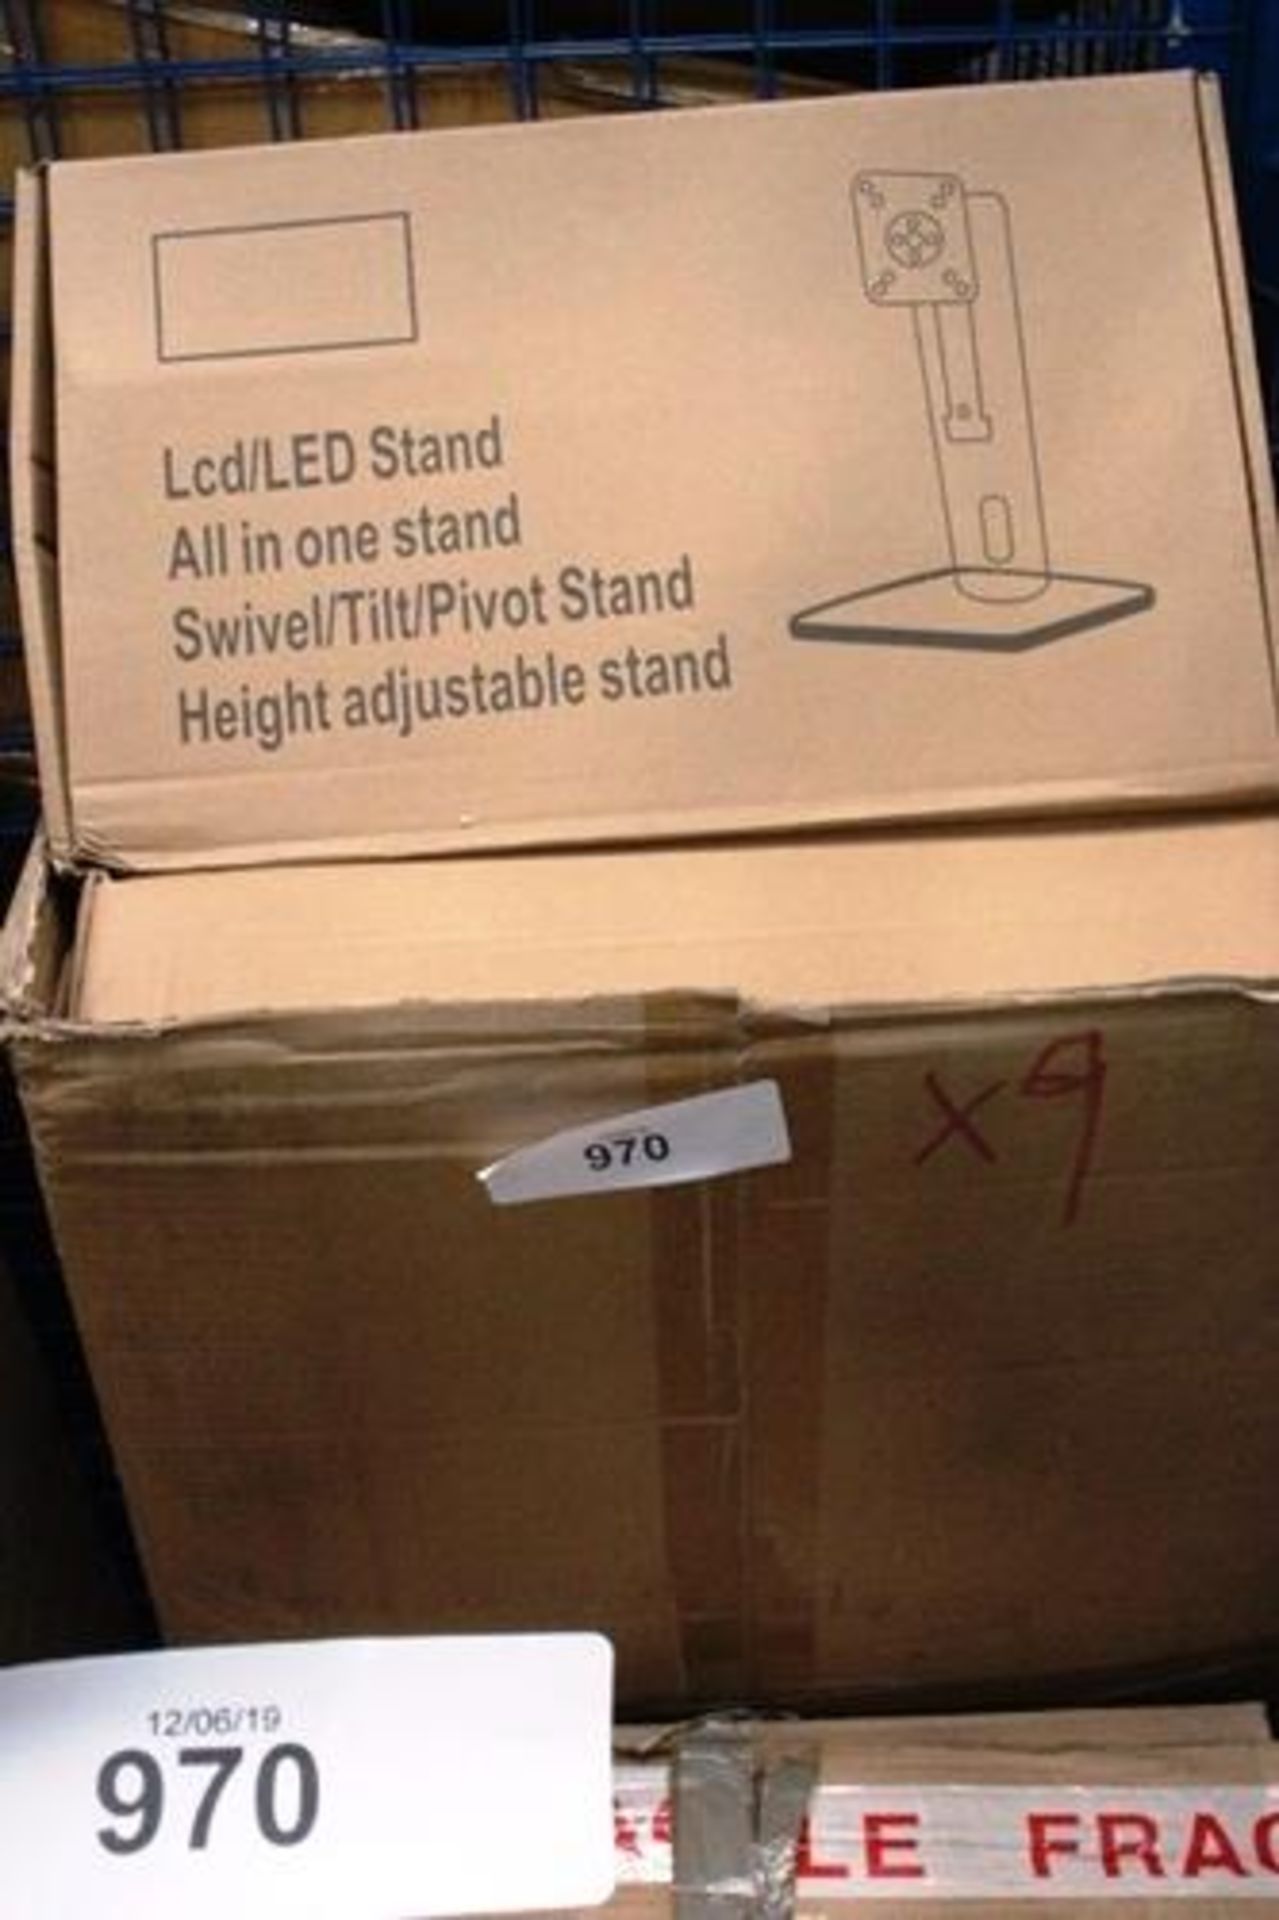 9 x adjustable height monitor stands, model 4711404022272 - Sealed new in box (GF26)